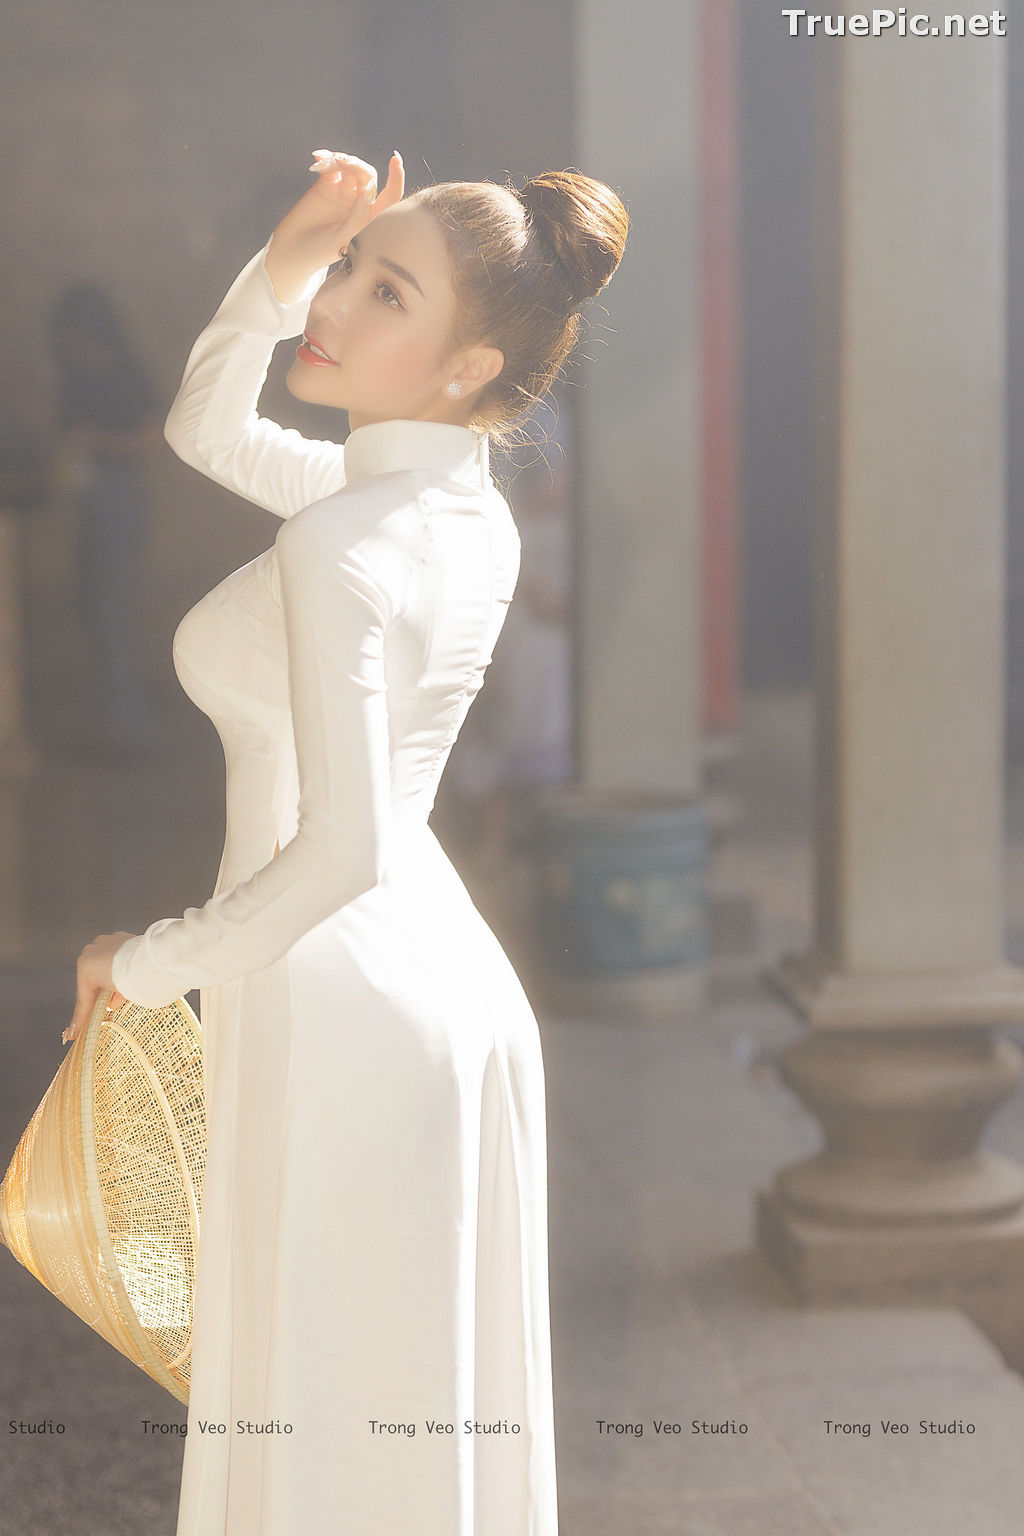 Image The Beauty of Vietnamese Girls with Traditional Dress (Ao Dai) #2 - TruePic.net - Picture-41